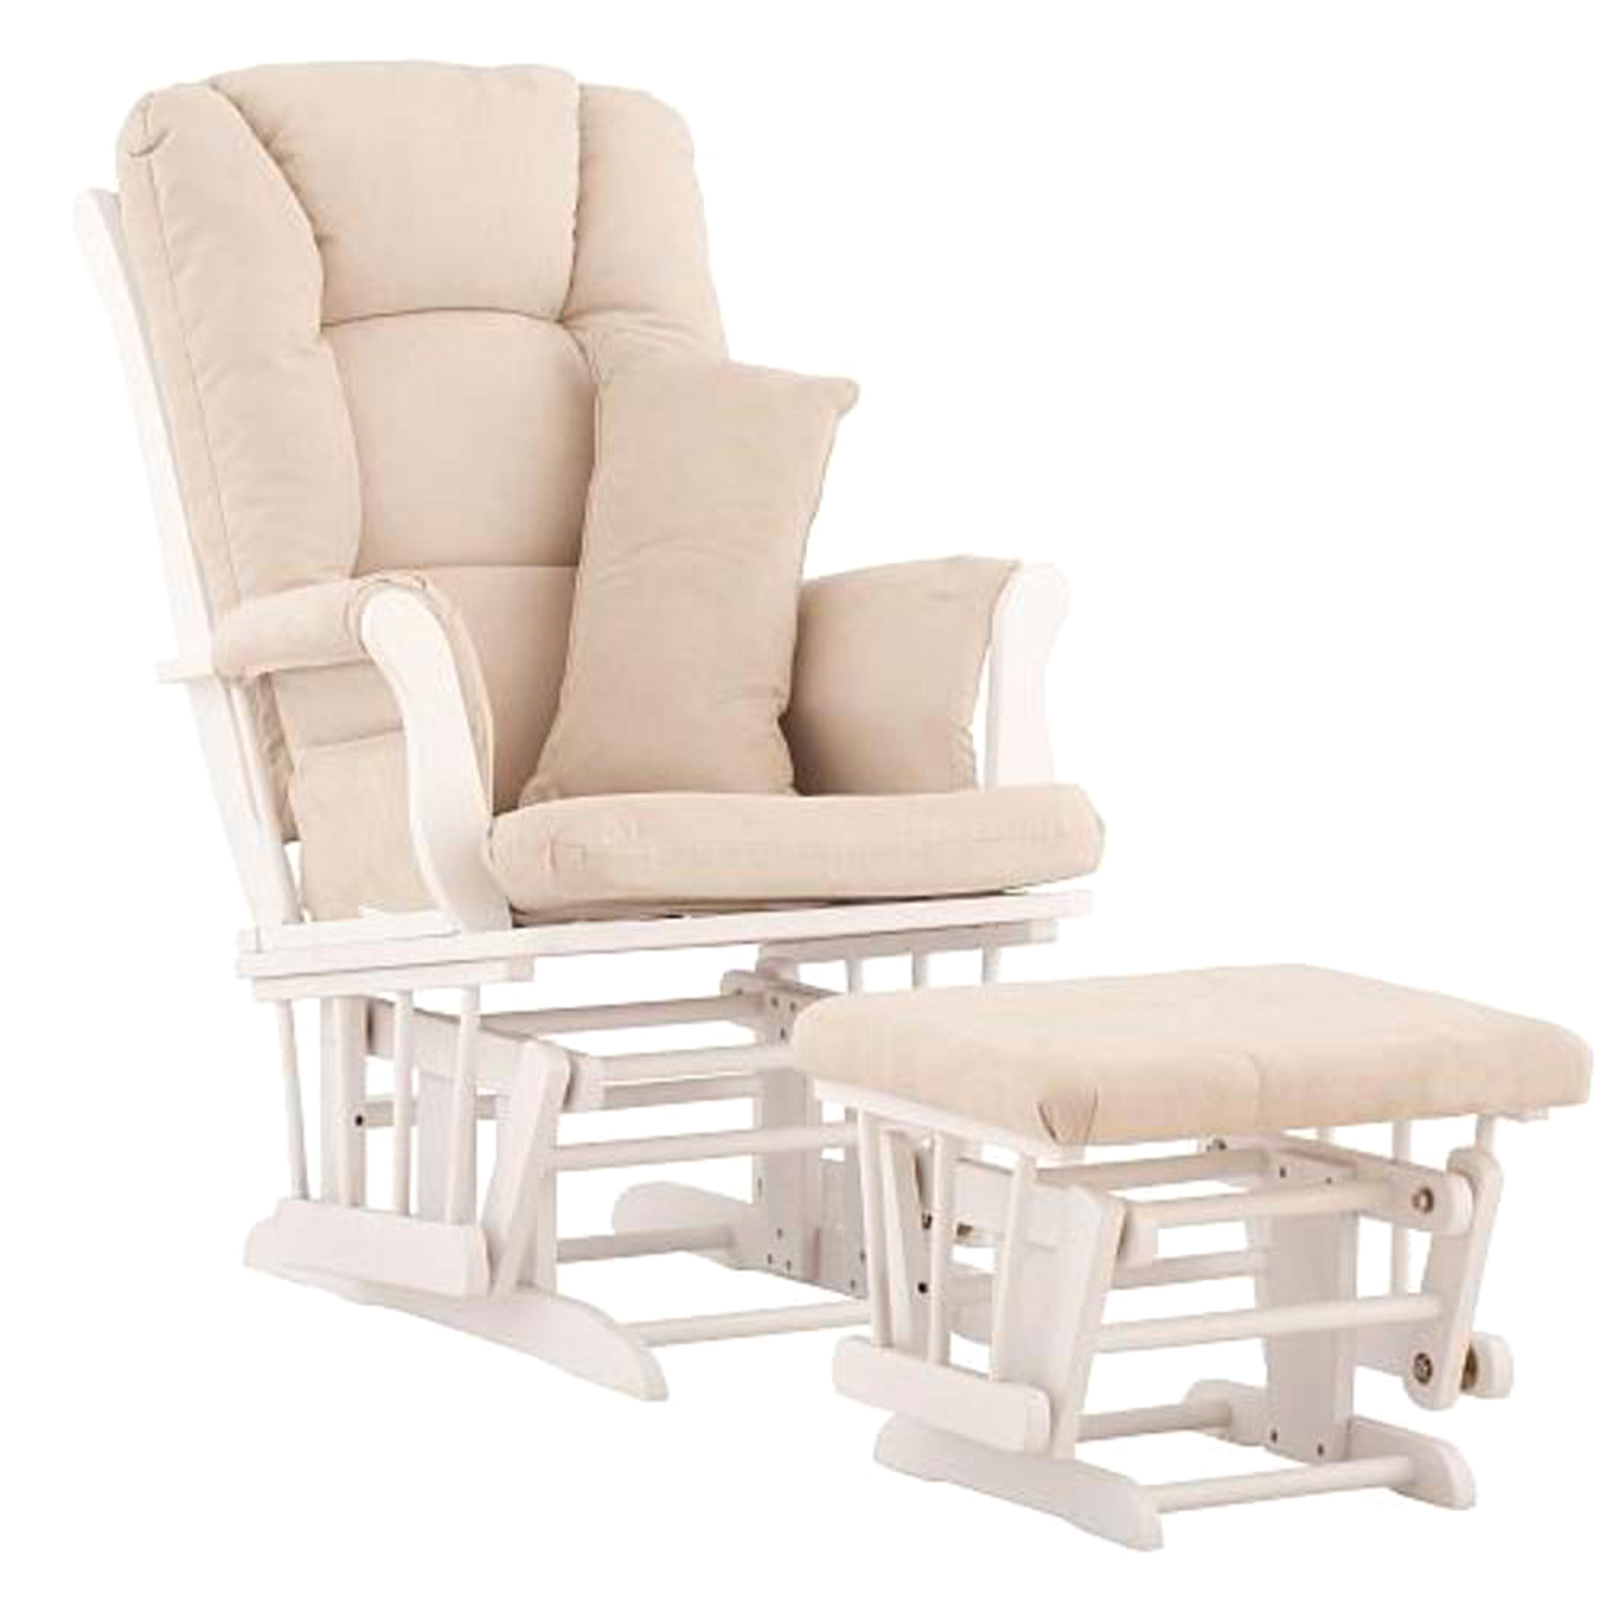 Storkcraft Tuscany 1-Seat Upholstered Glider with Ottoman - White